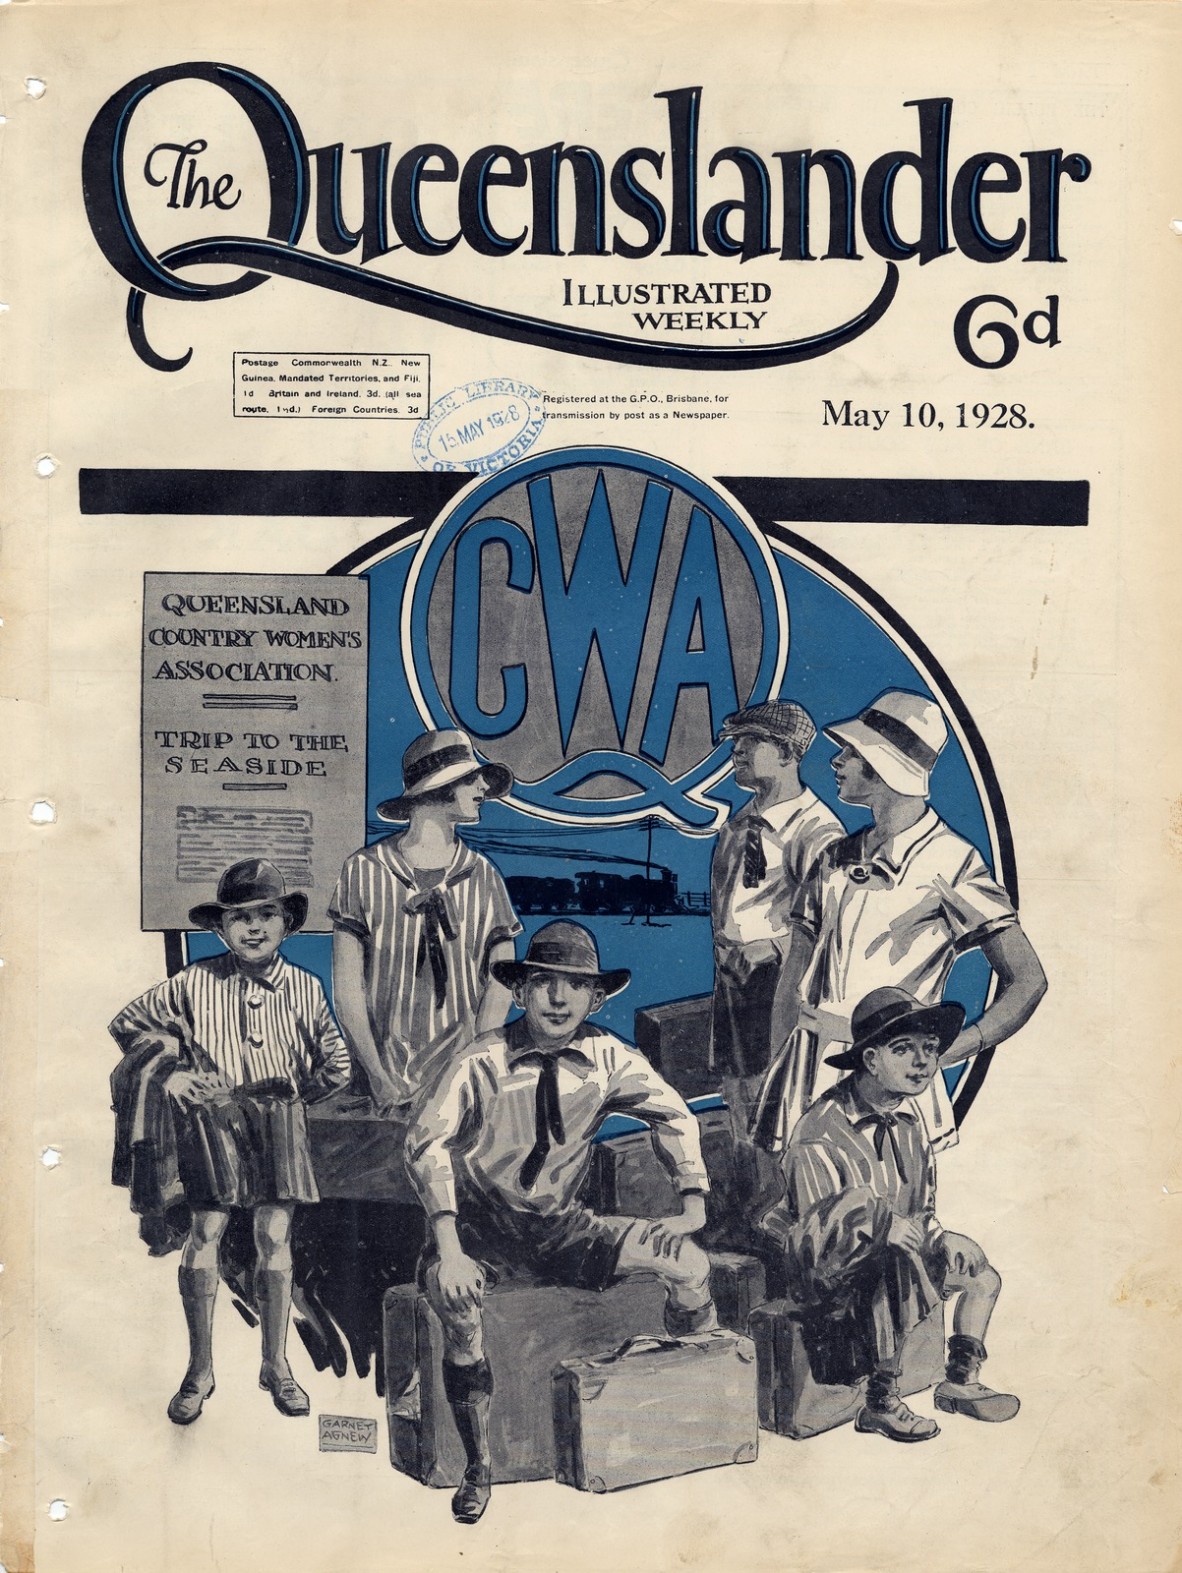 The Queenslander newspaper featuring he Country Womens Association 